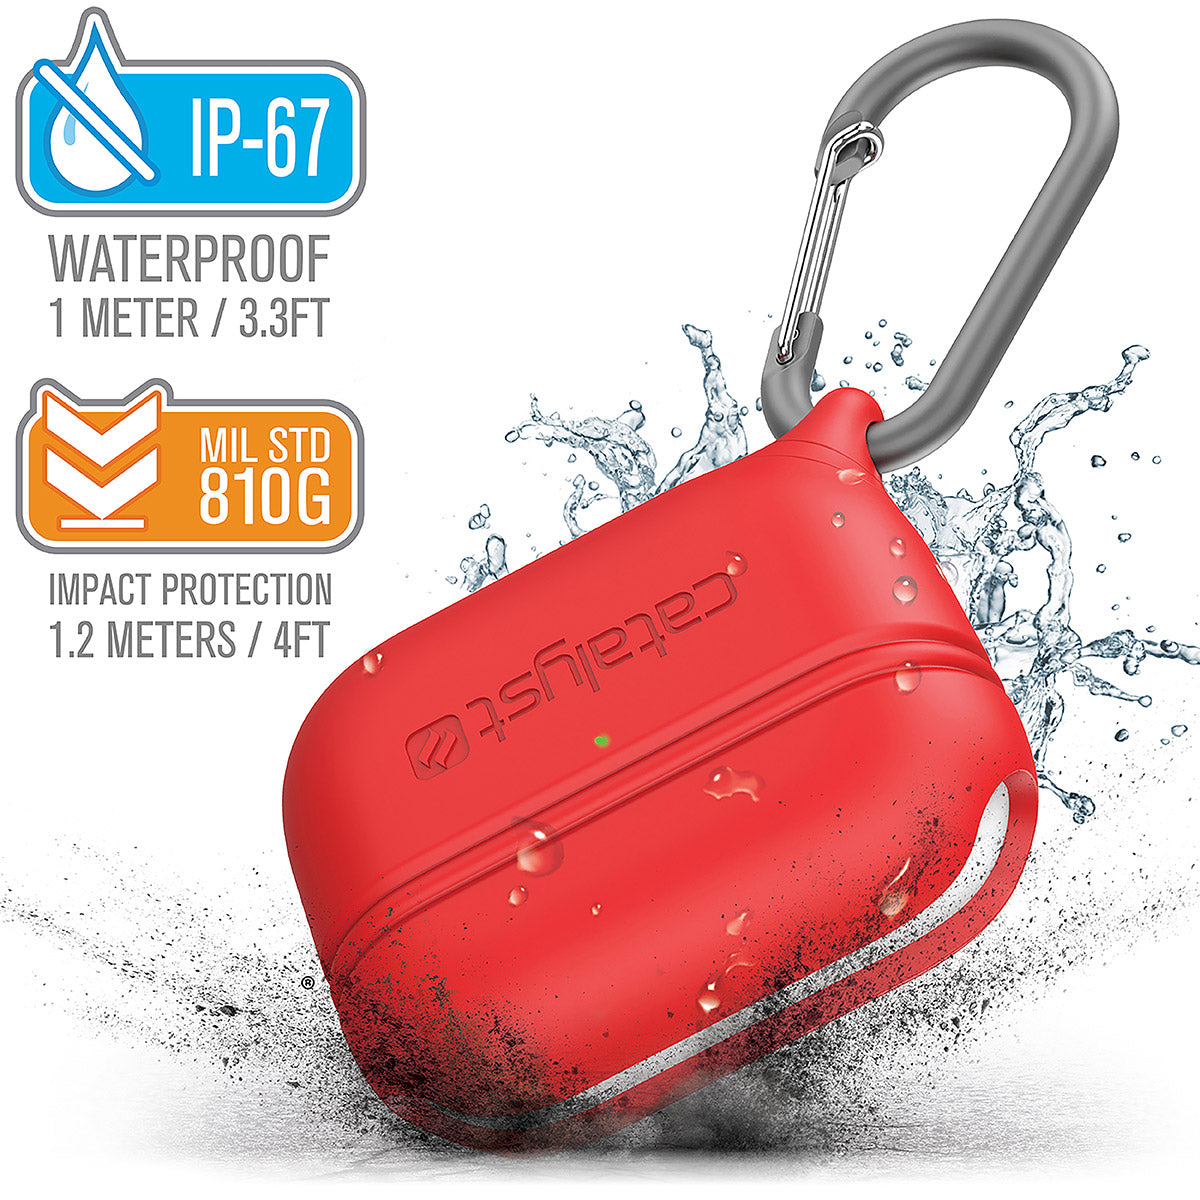 CATAPLAPDPRORED | catalyst airpods pro gen 2 1 waterproof case carabiner special edition red with cracked floor and splashes of water text reads ip-67 waterproof 1 meter 3.3ft mil std 810g impact protection 1.2 meters 4ft